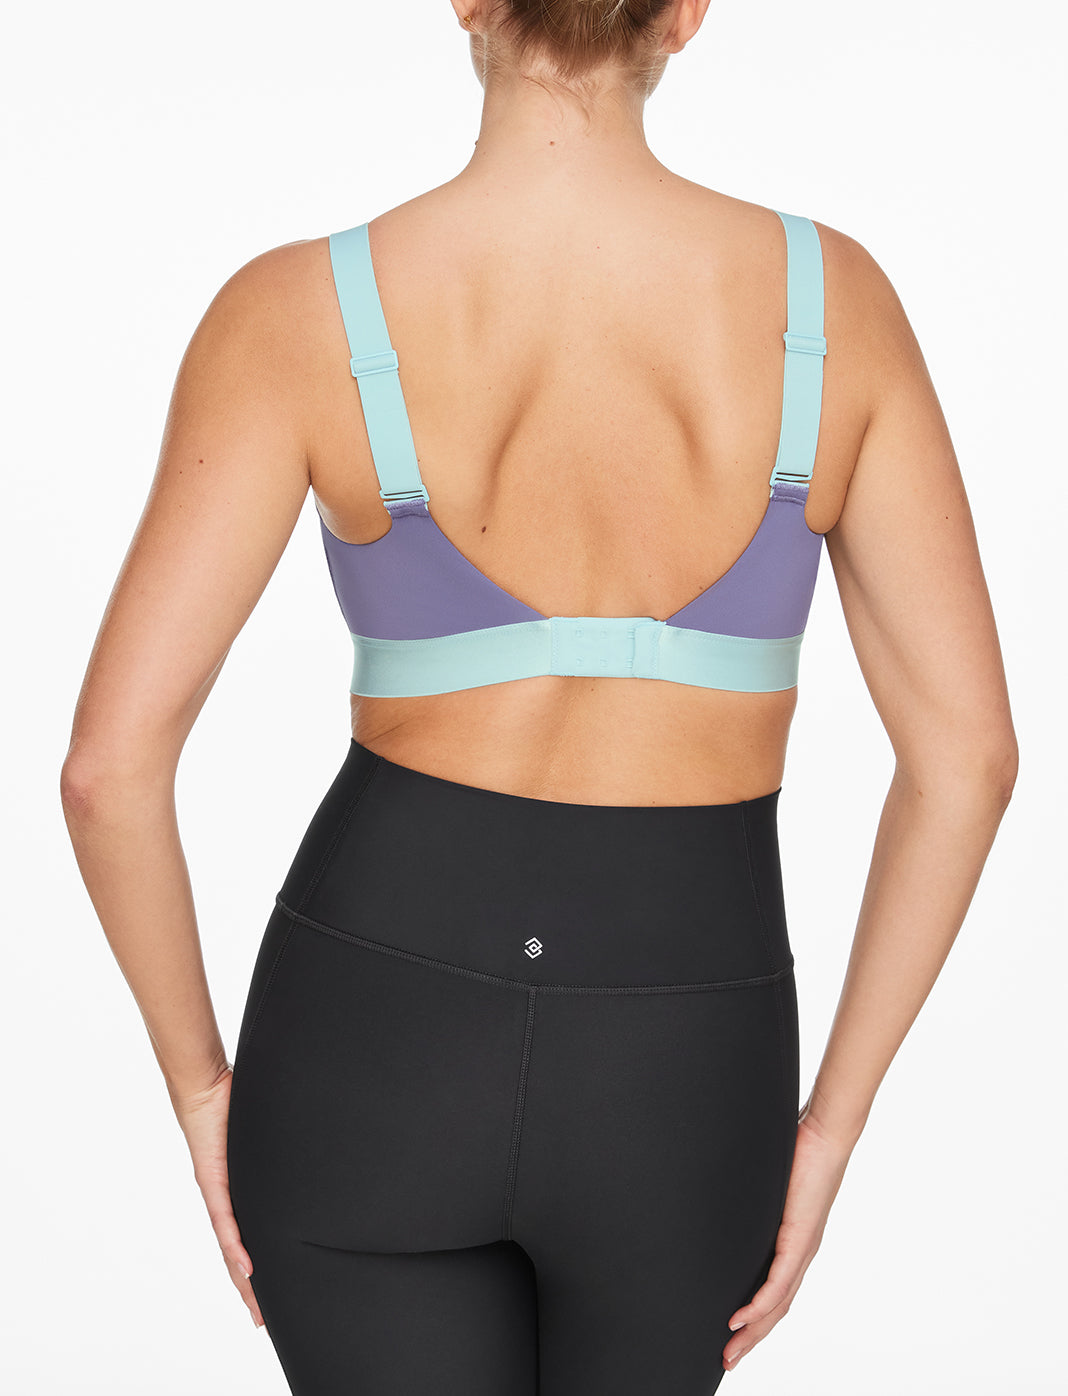 ThirdLove Kinetic Activewear Collection - Supportive & Comfortable